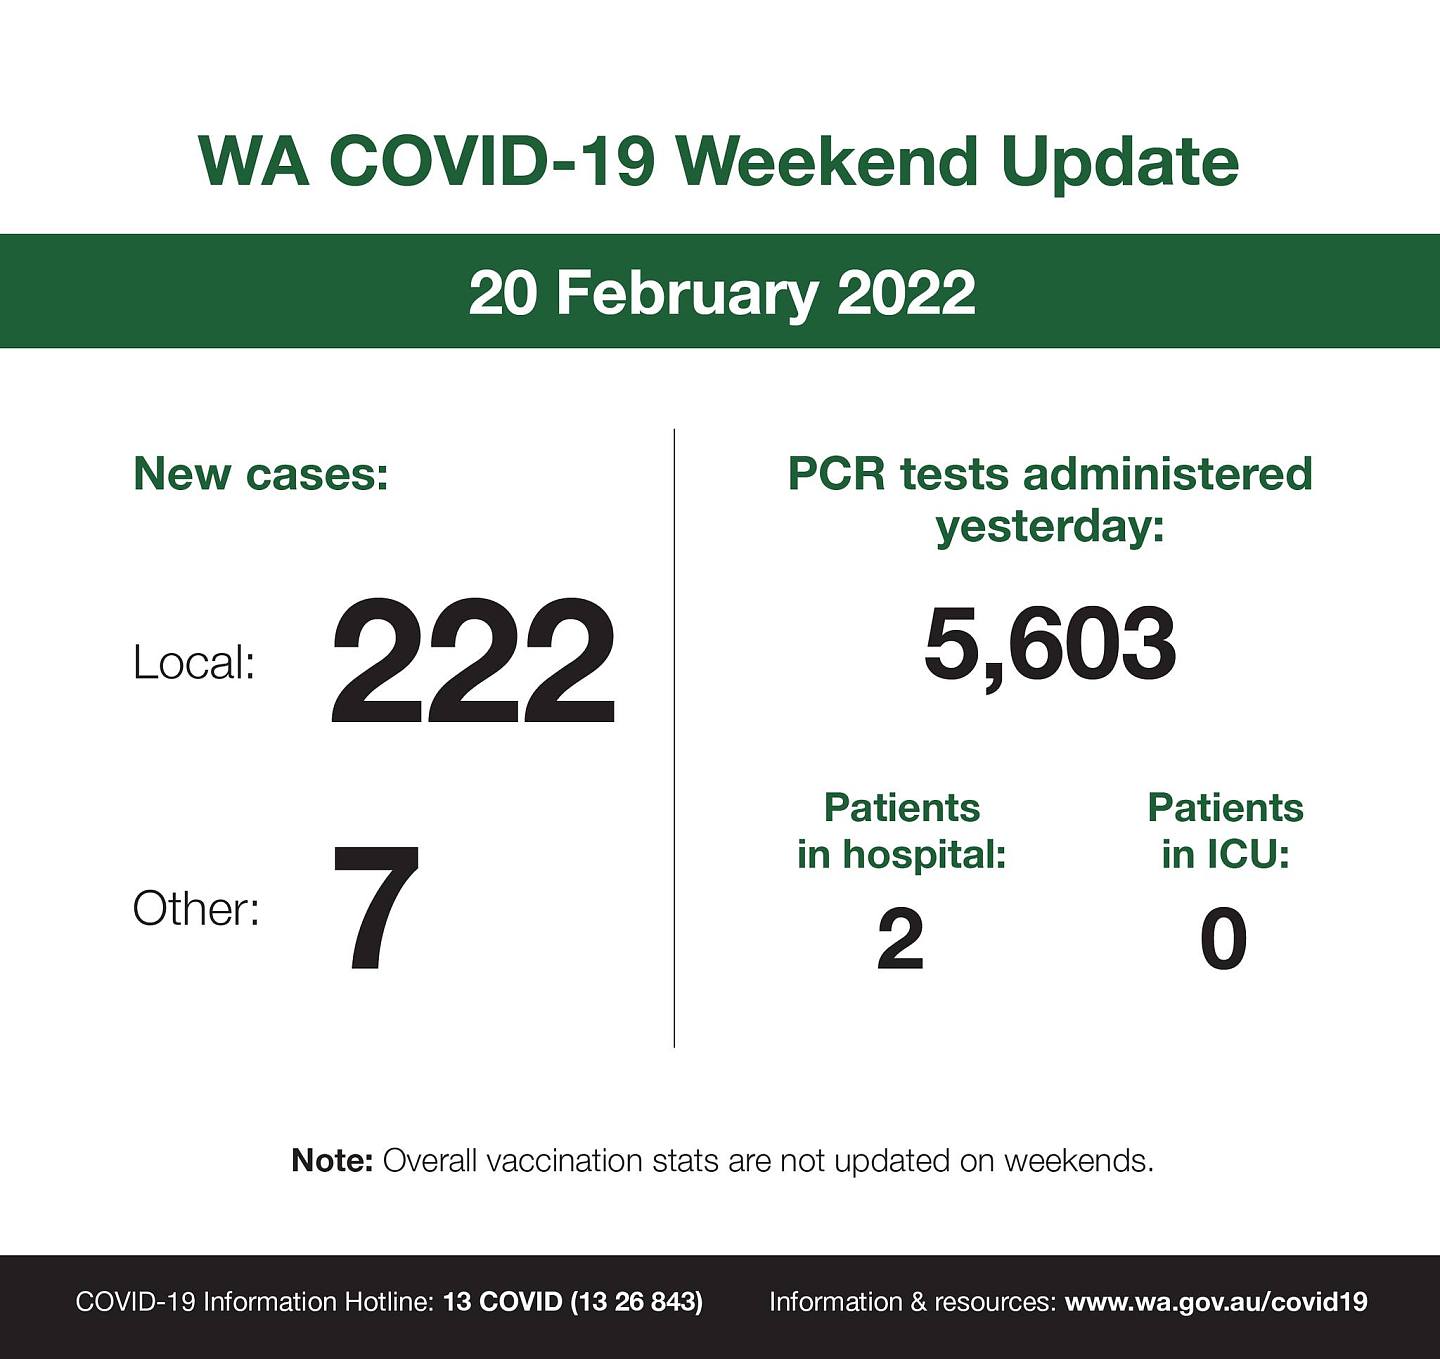 May be an image of text that says 'WA COVID-19 Weekend Update 20 February 2022 New cases: Local: PCR tests administered yesterday: 5,603 222 Other: Patients in hospital: 2 7 Patients in ICU: 0 Note: Overall vaccination stats are not updated on weekends. COVID-19 Information Hotline 13 COVID (13 26 843) Information & resources: www.wa.gov.au/covid19'